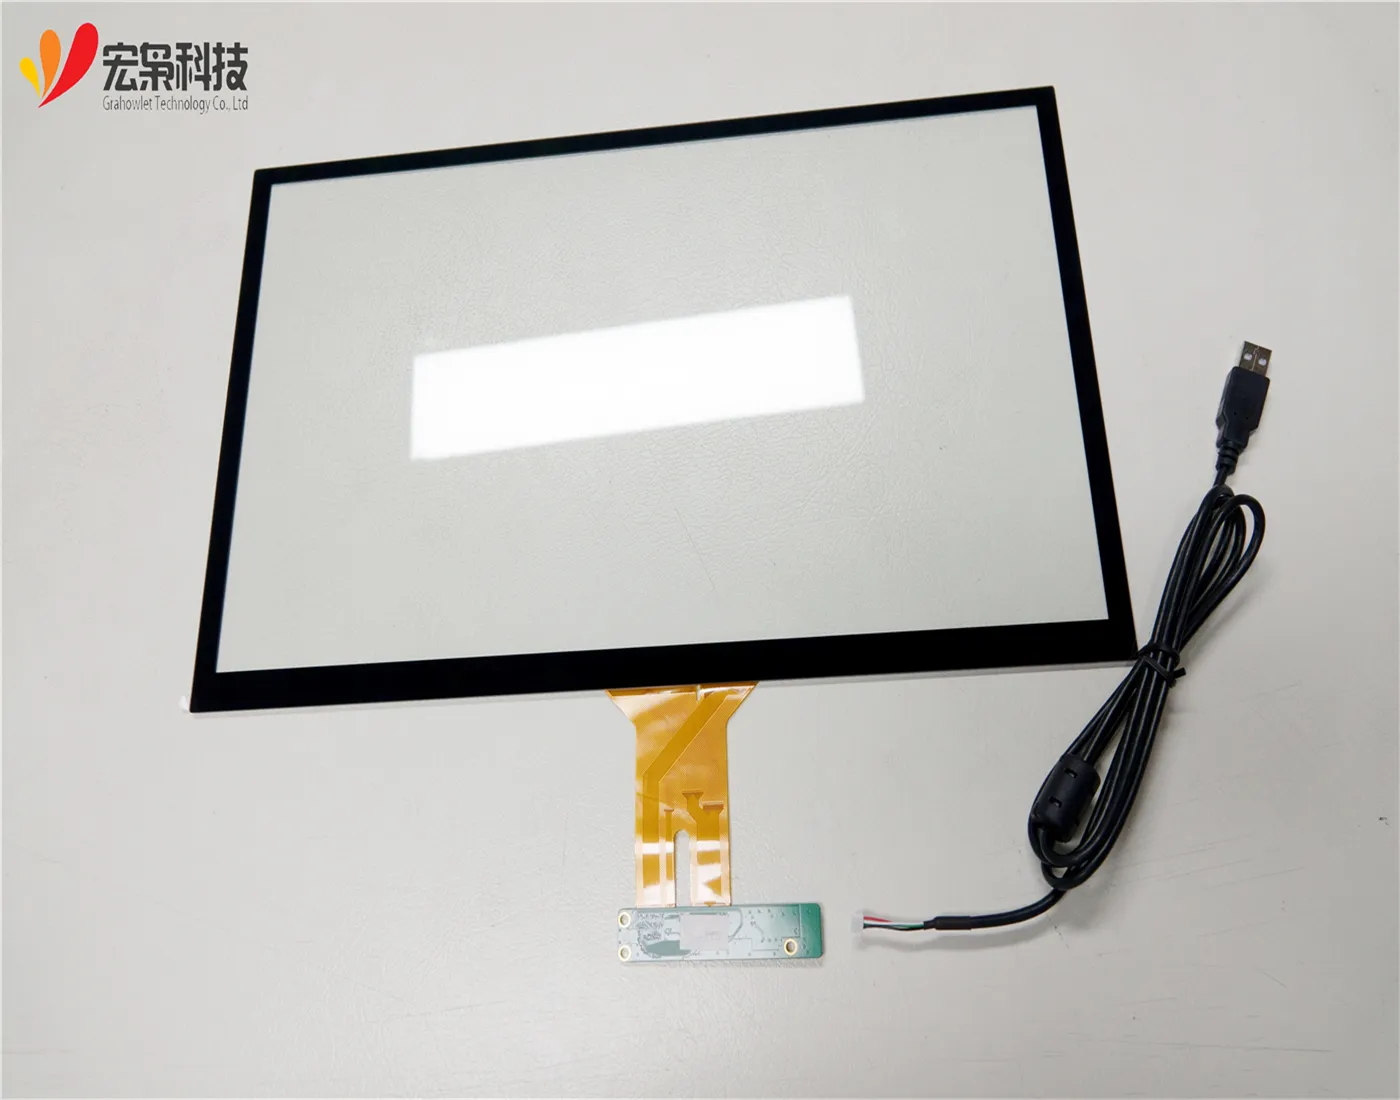 multi touch capacitive touch panel 13.3,15,15.6,17,17.3,18.5,19,21.5 usb touch screen overlay kit